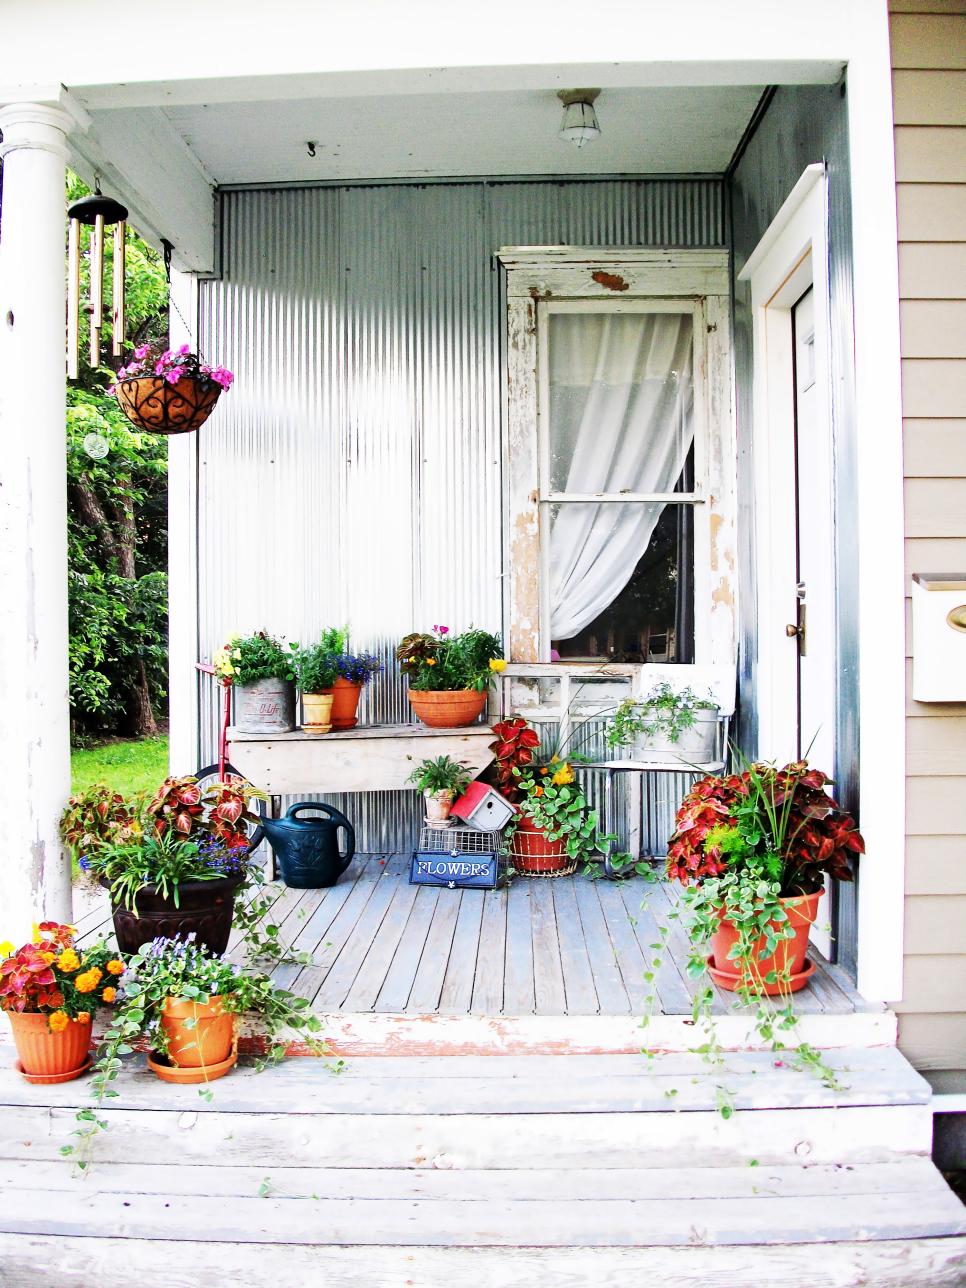 Shabby Chic Decorating Ideas For Porches And Gardens DIY